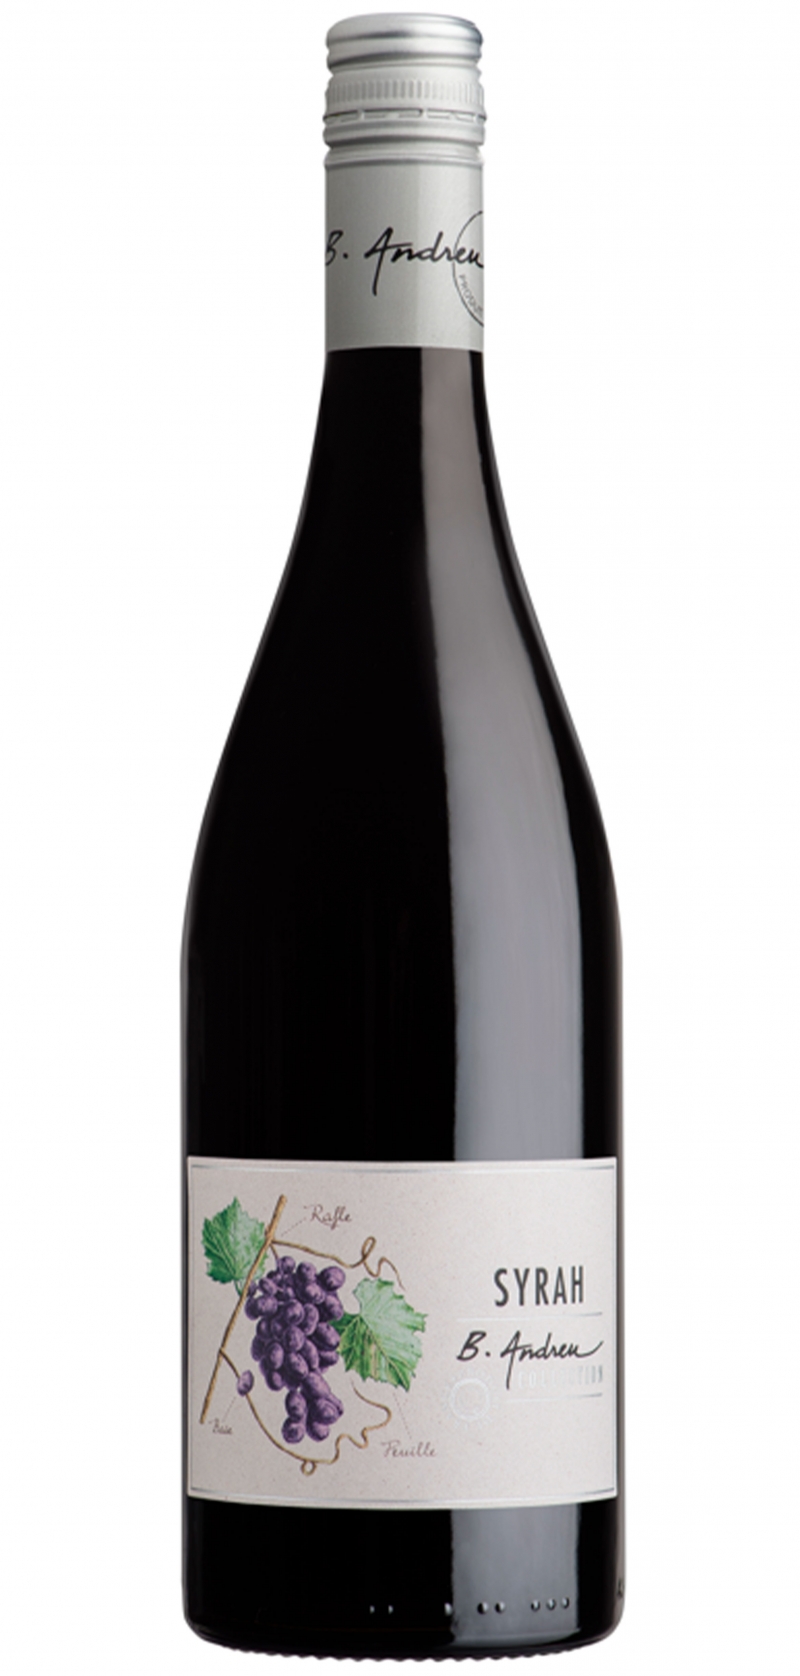 Bruno Andreu - Red wine from France - Syrah